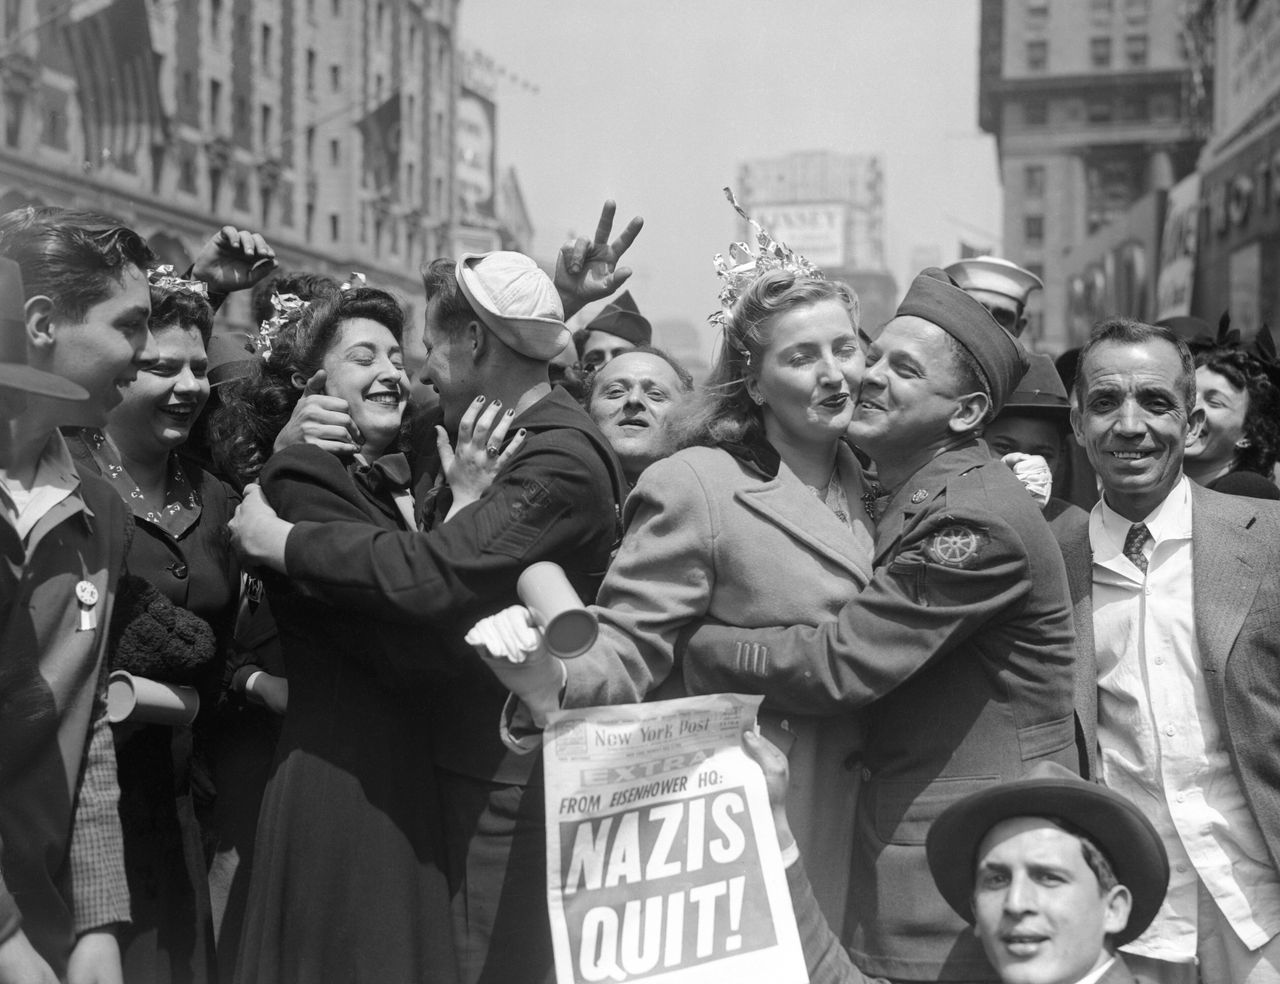 People celebrate on World War II Victory Day with a newspaper headline reading, "Nazis Quit!"